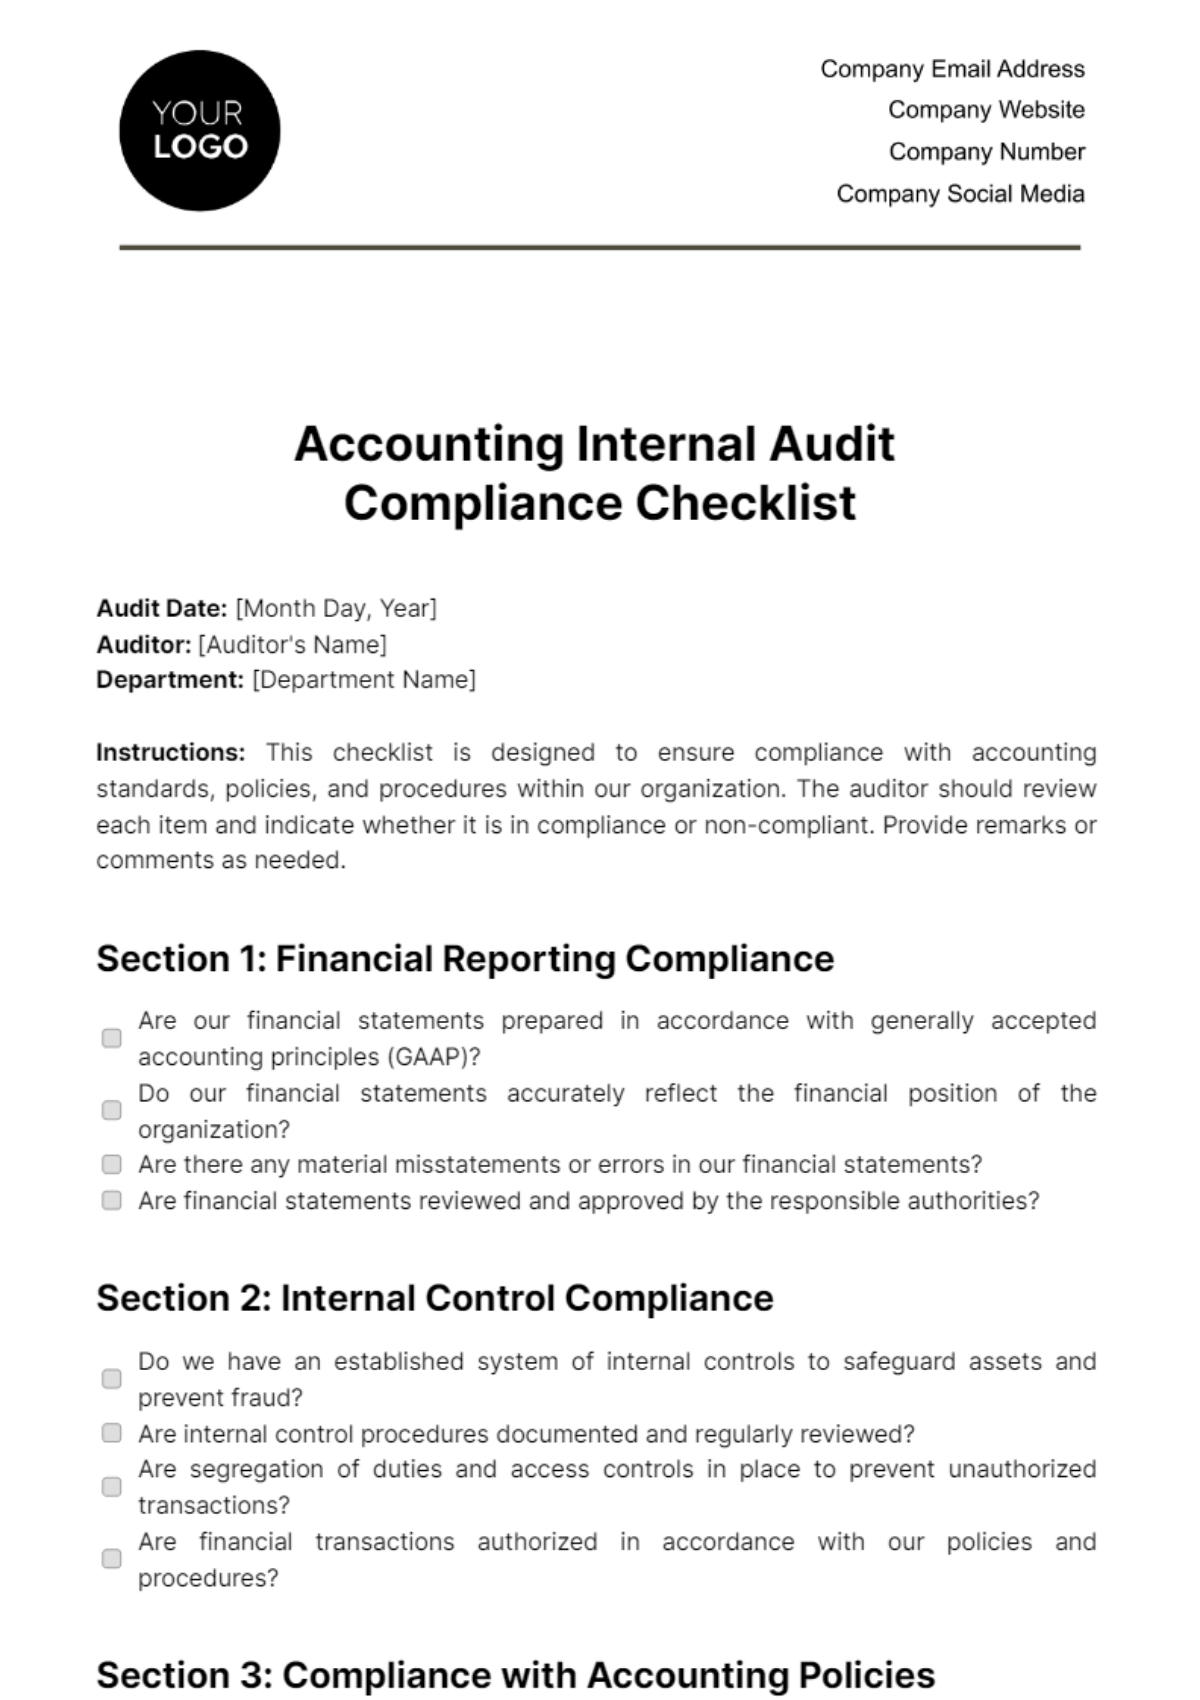 Free Accounting Internal Audit Compliance Checklist Template